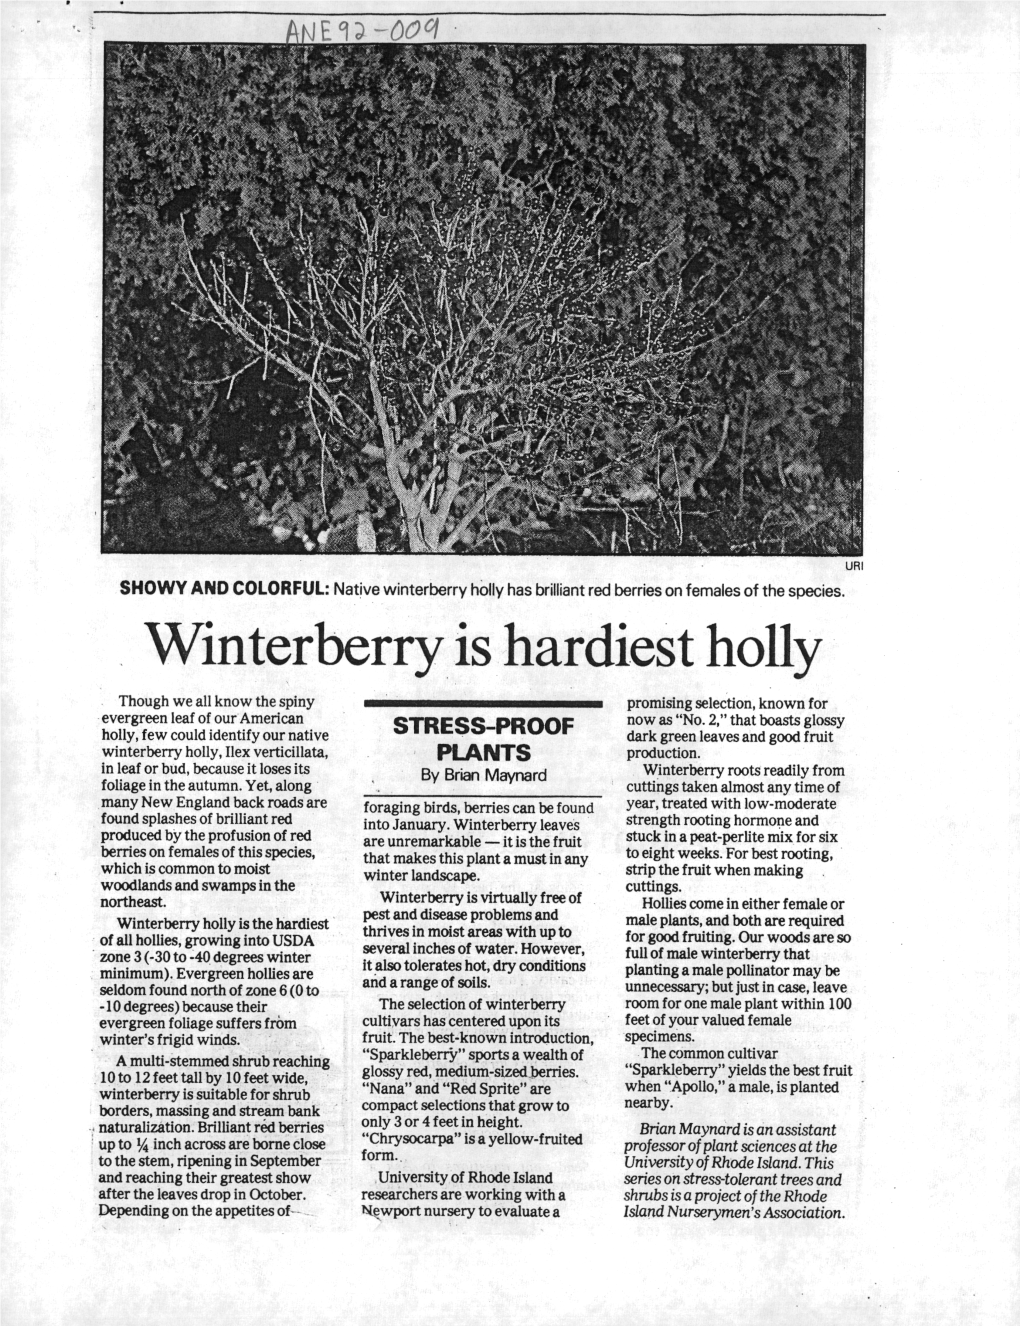 Winterberry Is Hardiest Holly Though We All Know the Spiny Promising Selection, Known for Evergreen Leaf of Our American Now As "No